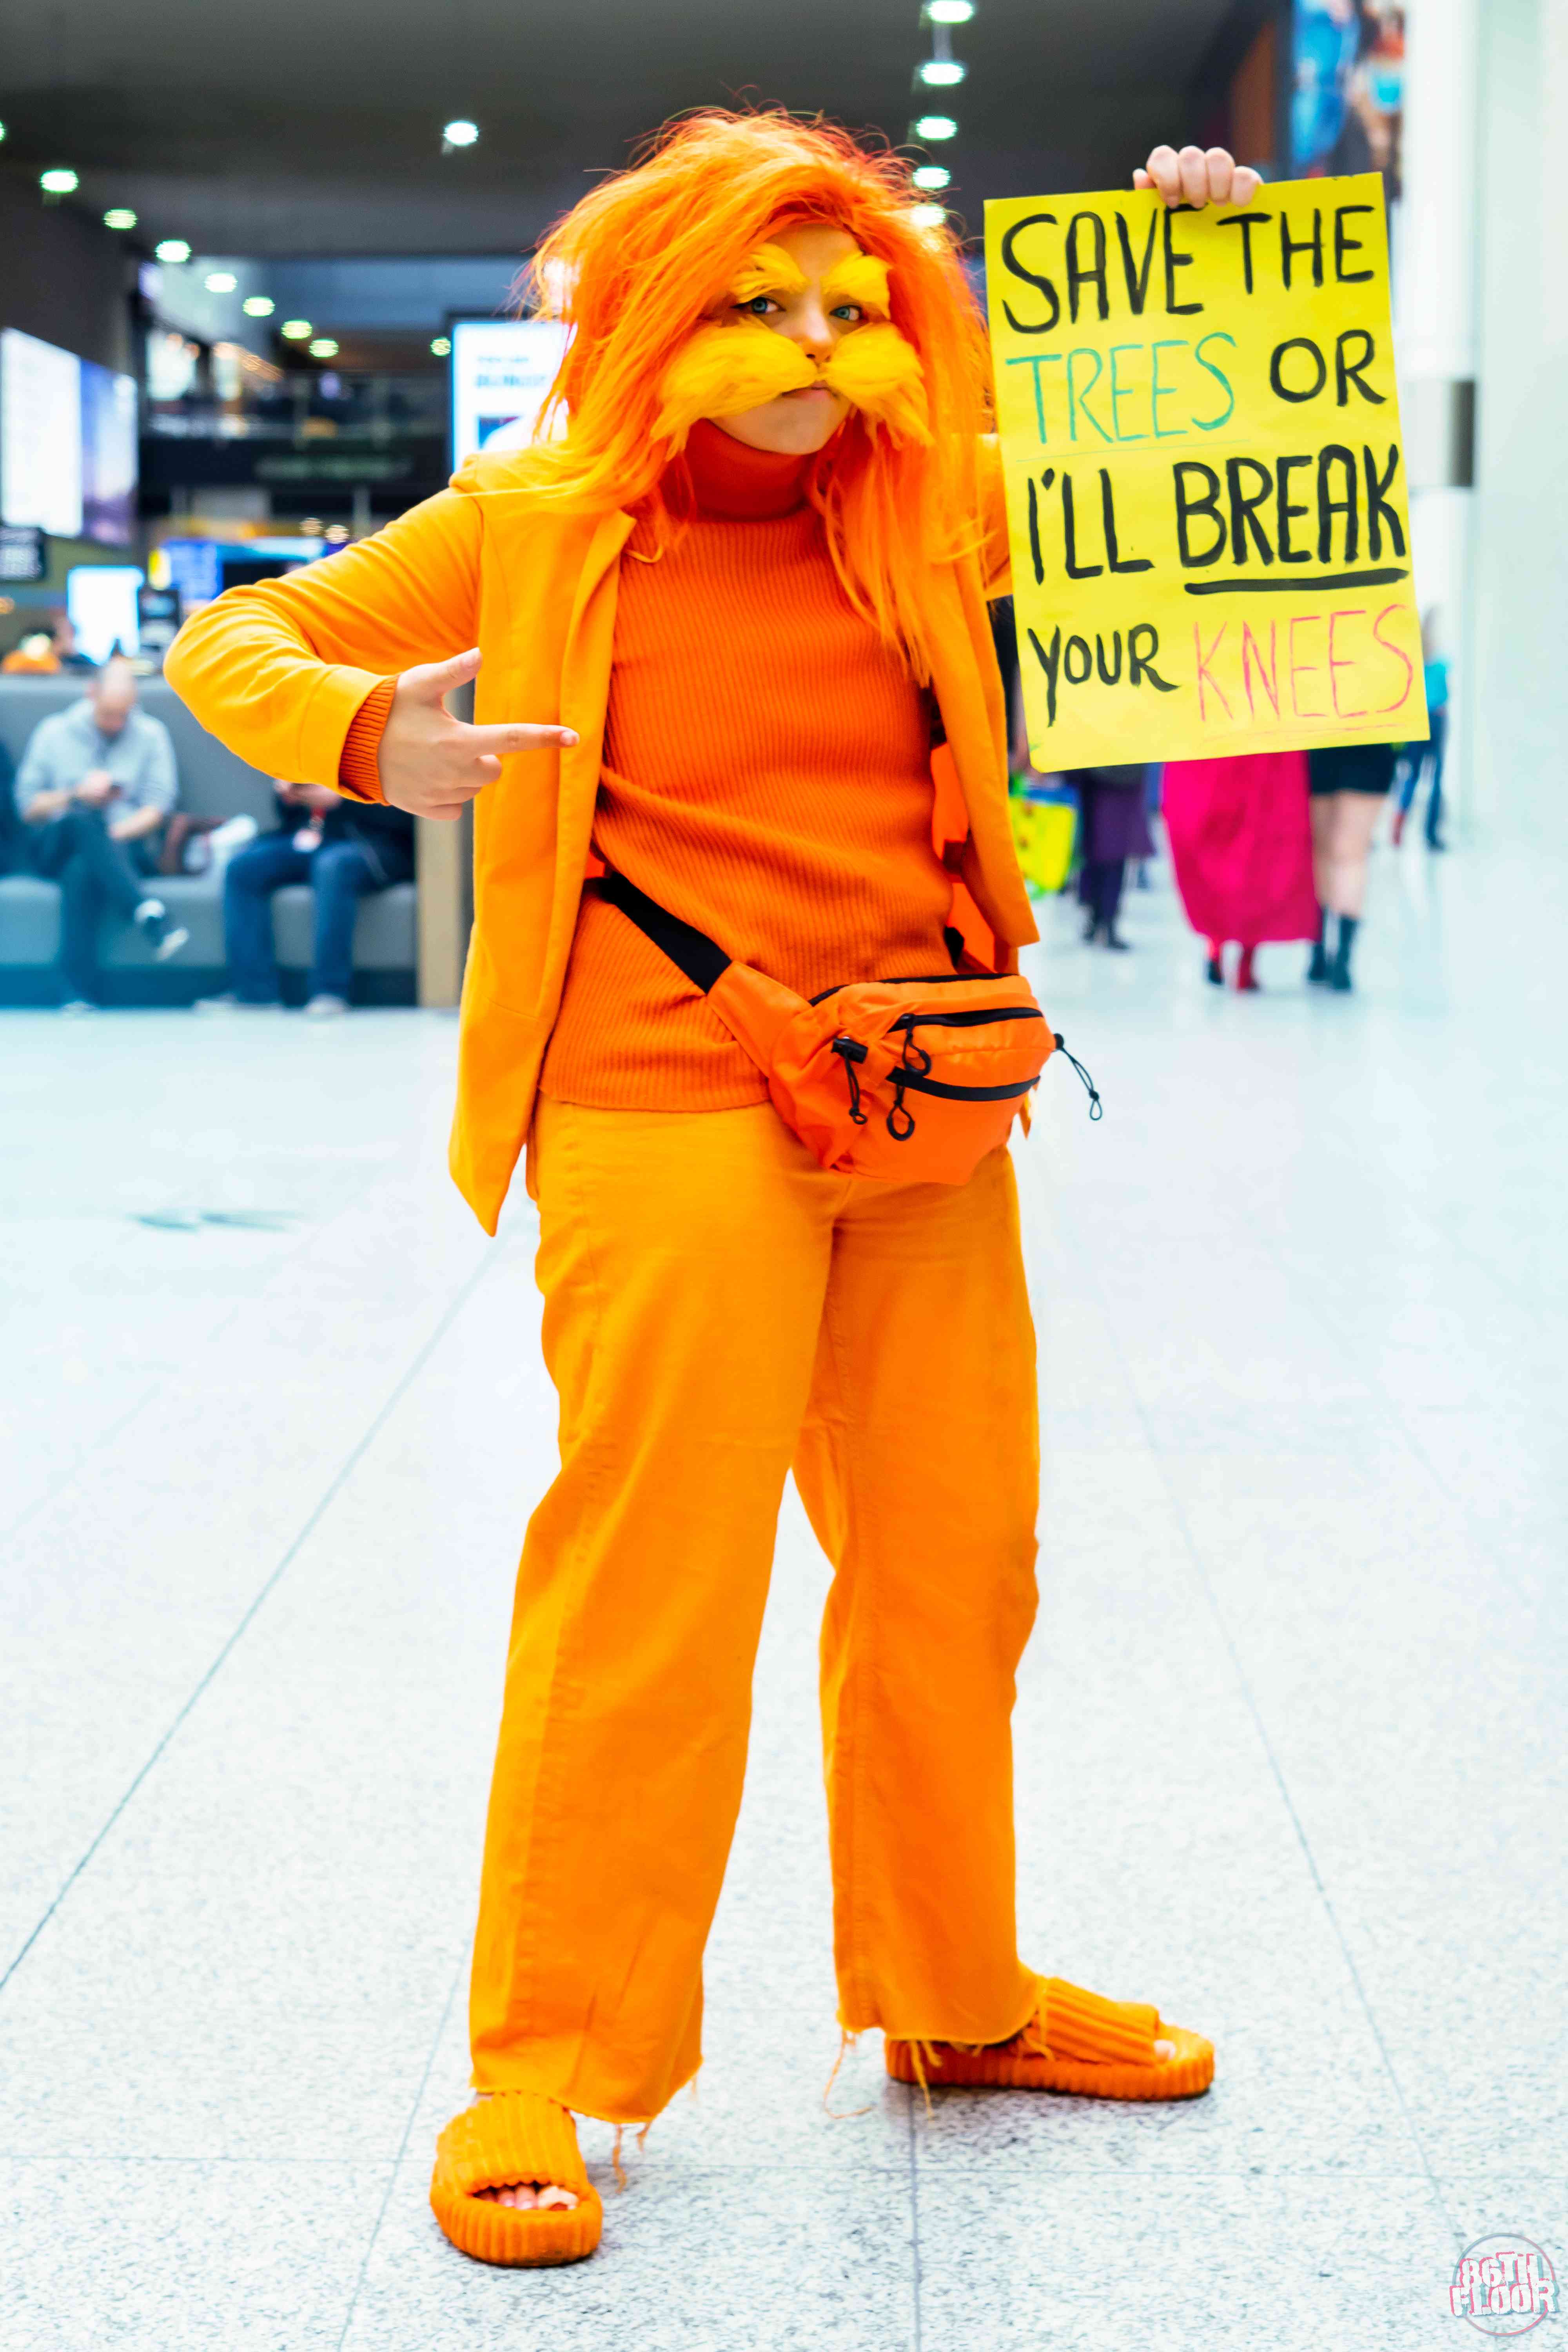 The Lorax Dr Seuss MCM London October 2022 86th Floor Cosplay and Cons